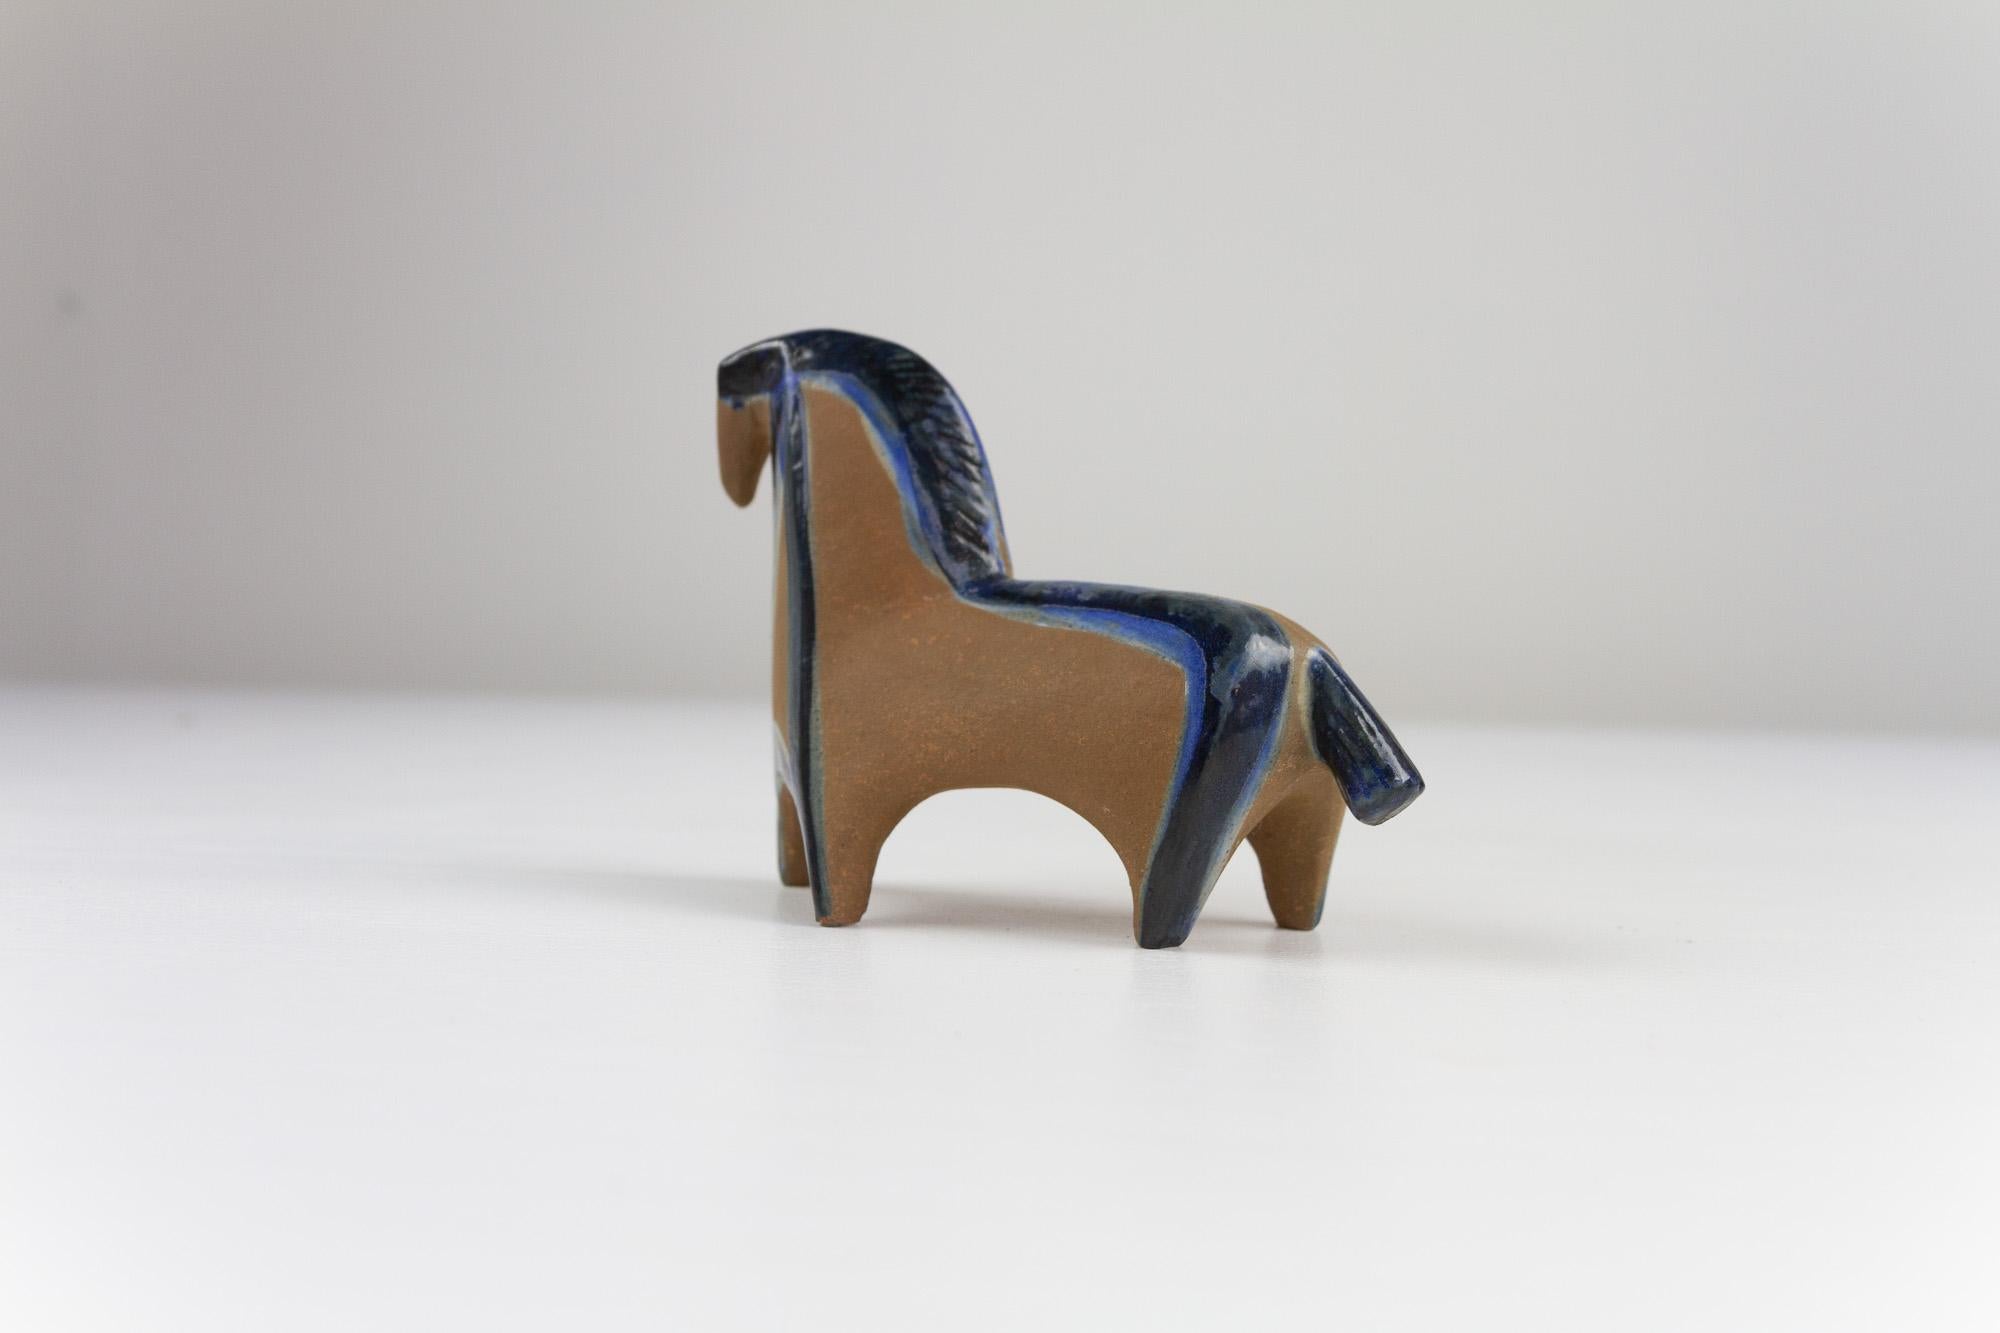 Vintage Swedish stoneware horse by Lisa Larson for Gustavsberg, 1950s.

This small Scandinavian modern ceramic horse figurine is part of the Small Zoo collection. The series consists of seven animal figurines and was sold between 1956 and 1978. It